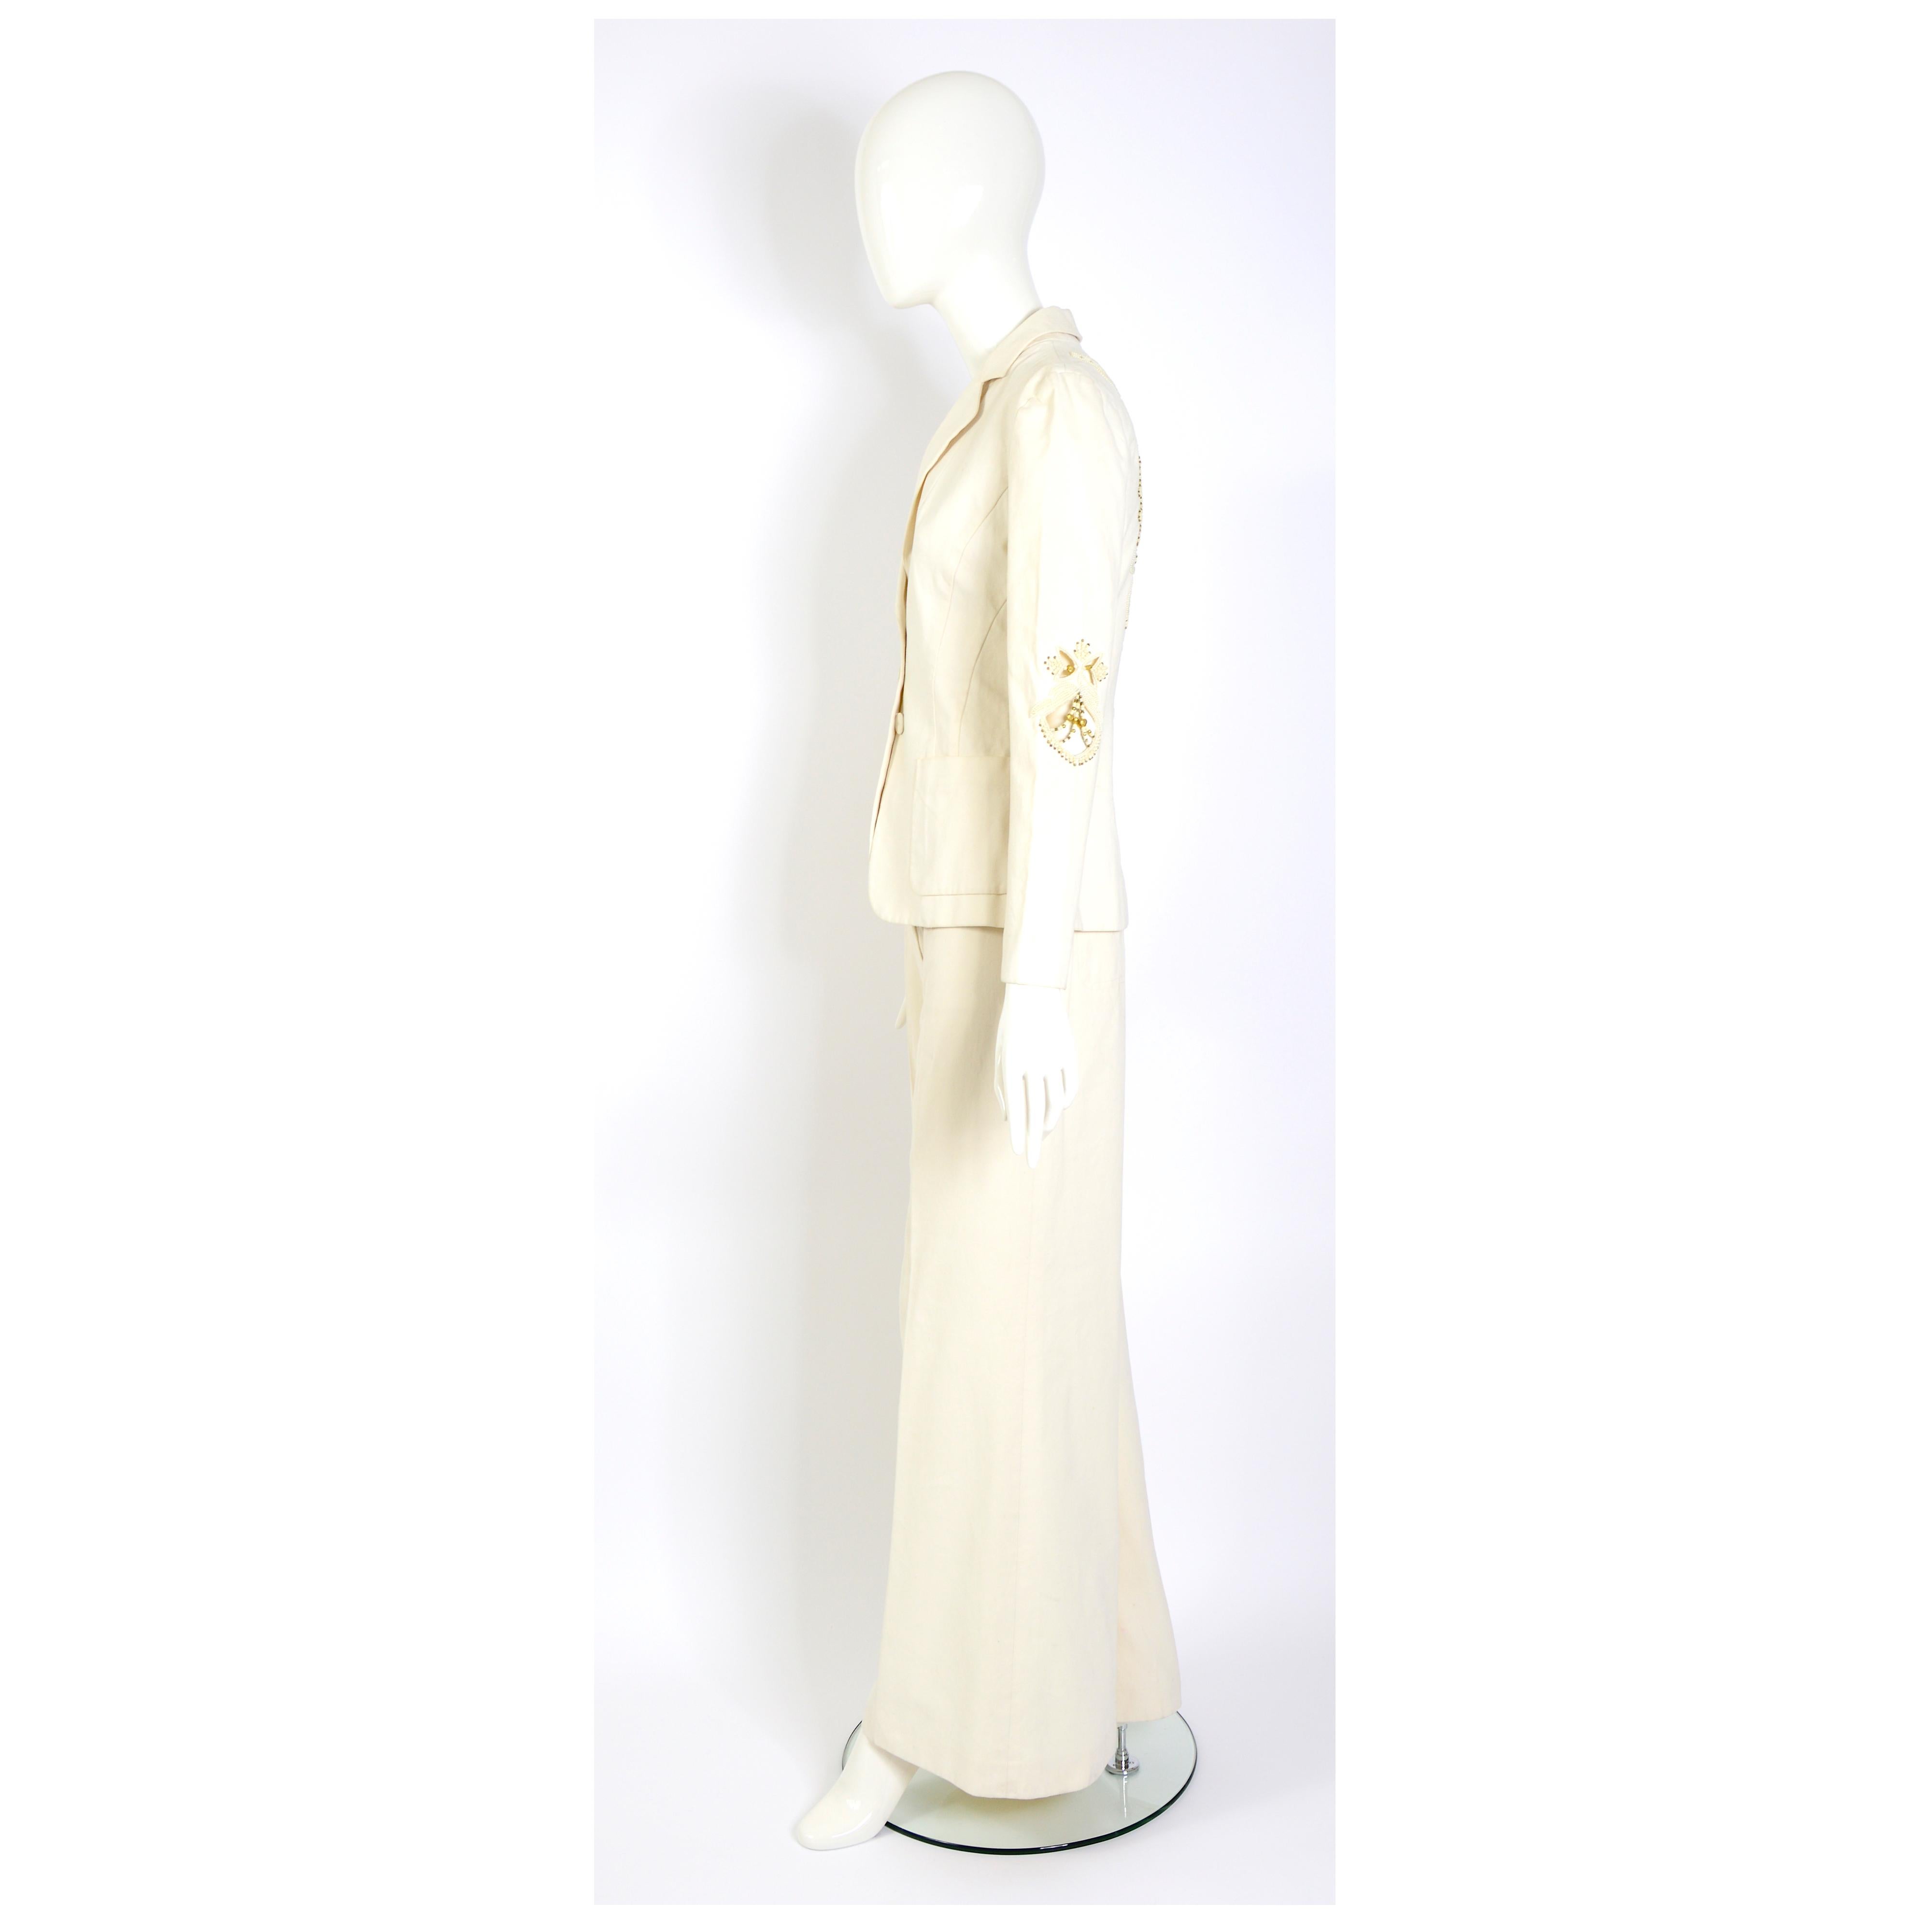 Chloé by Phoebe Philo vintage S/S 2002 embellished back and sleeves cream suit For Sale 1